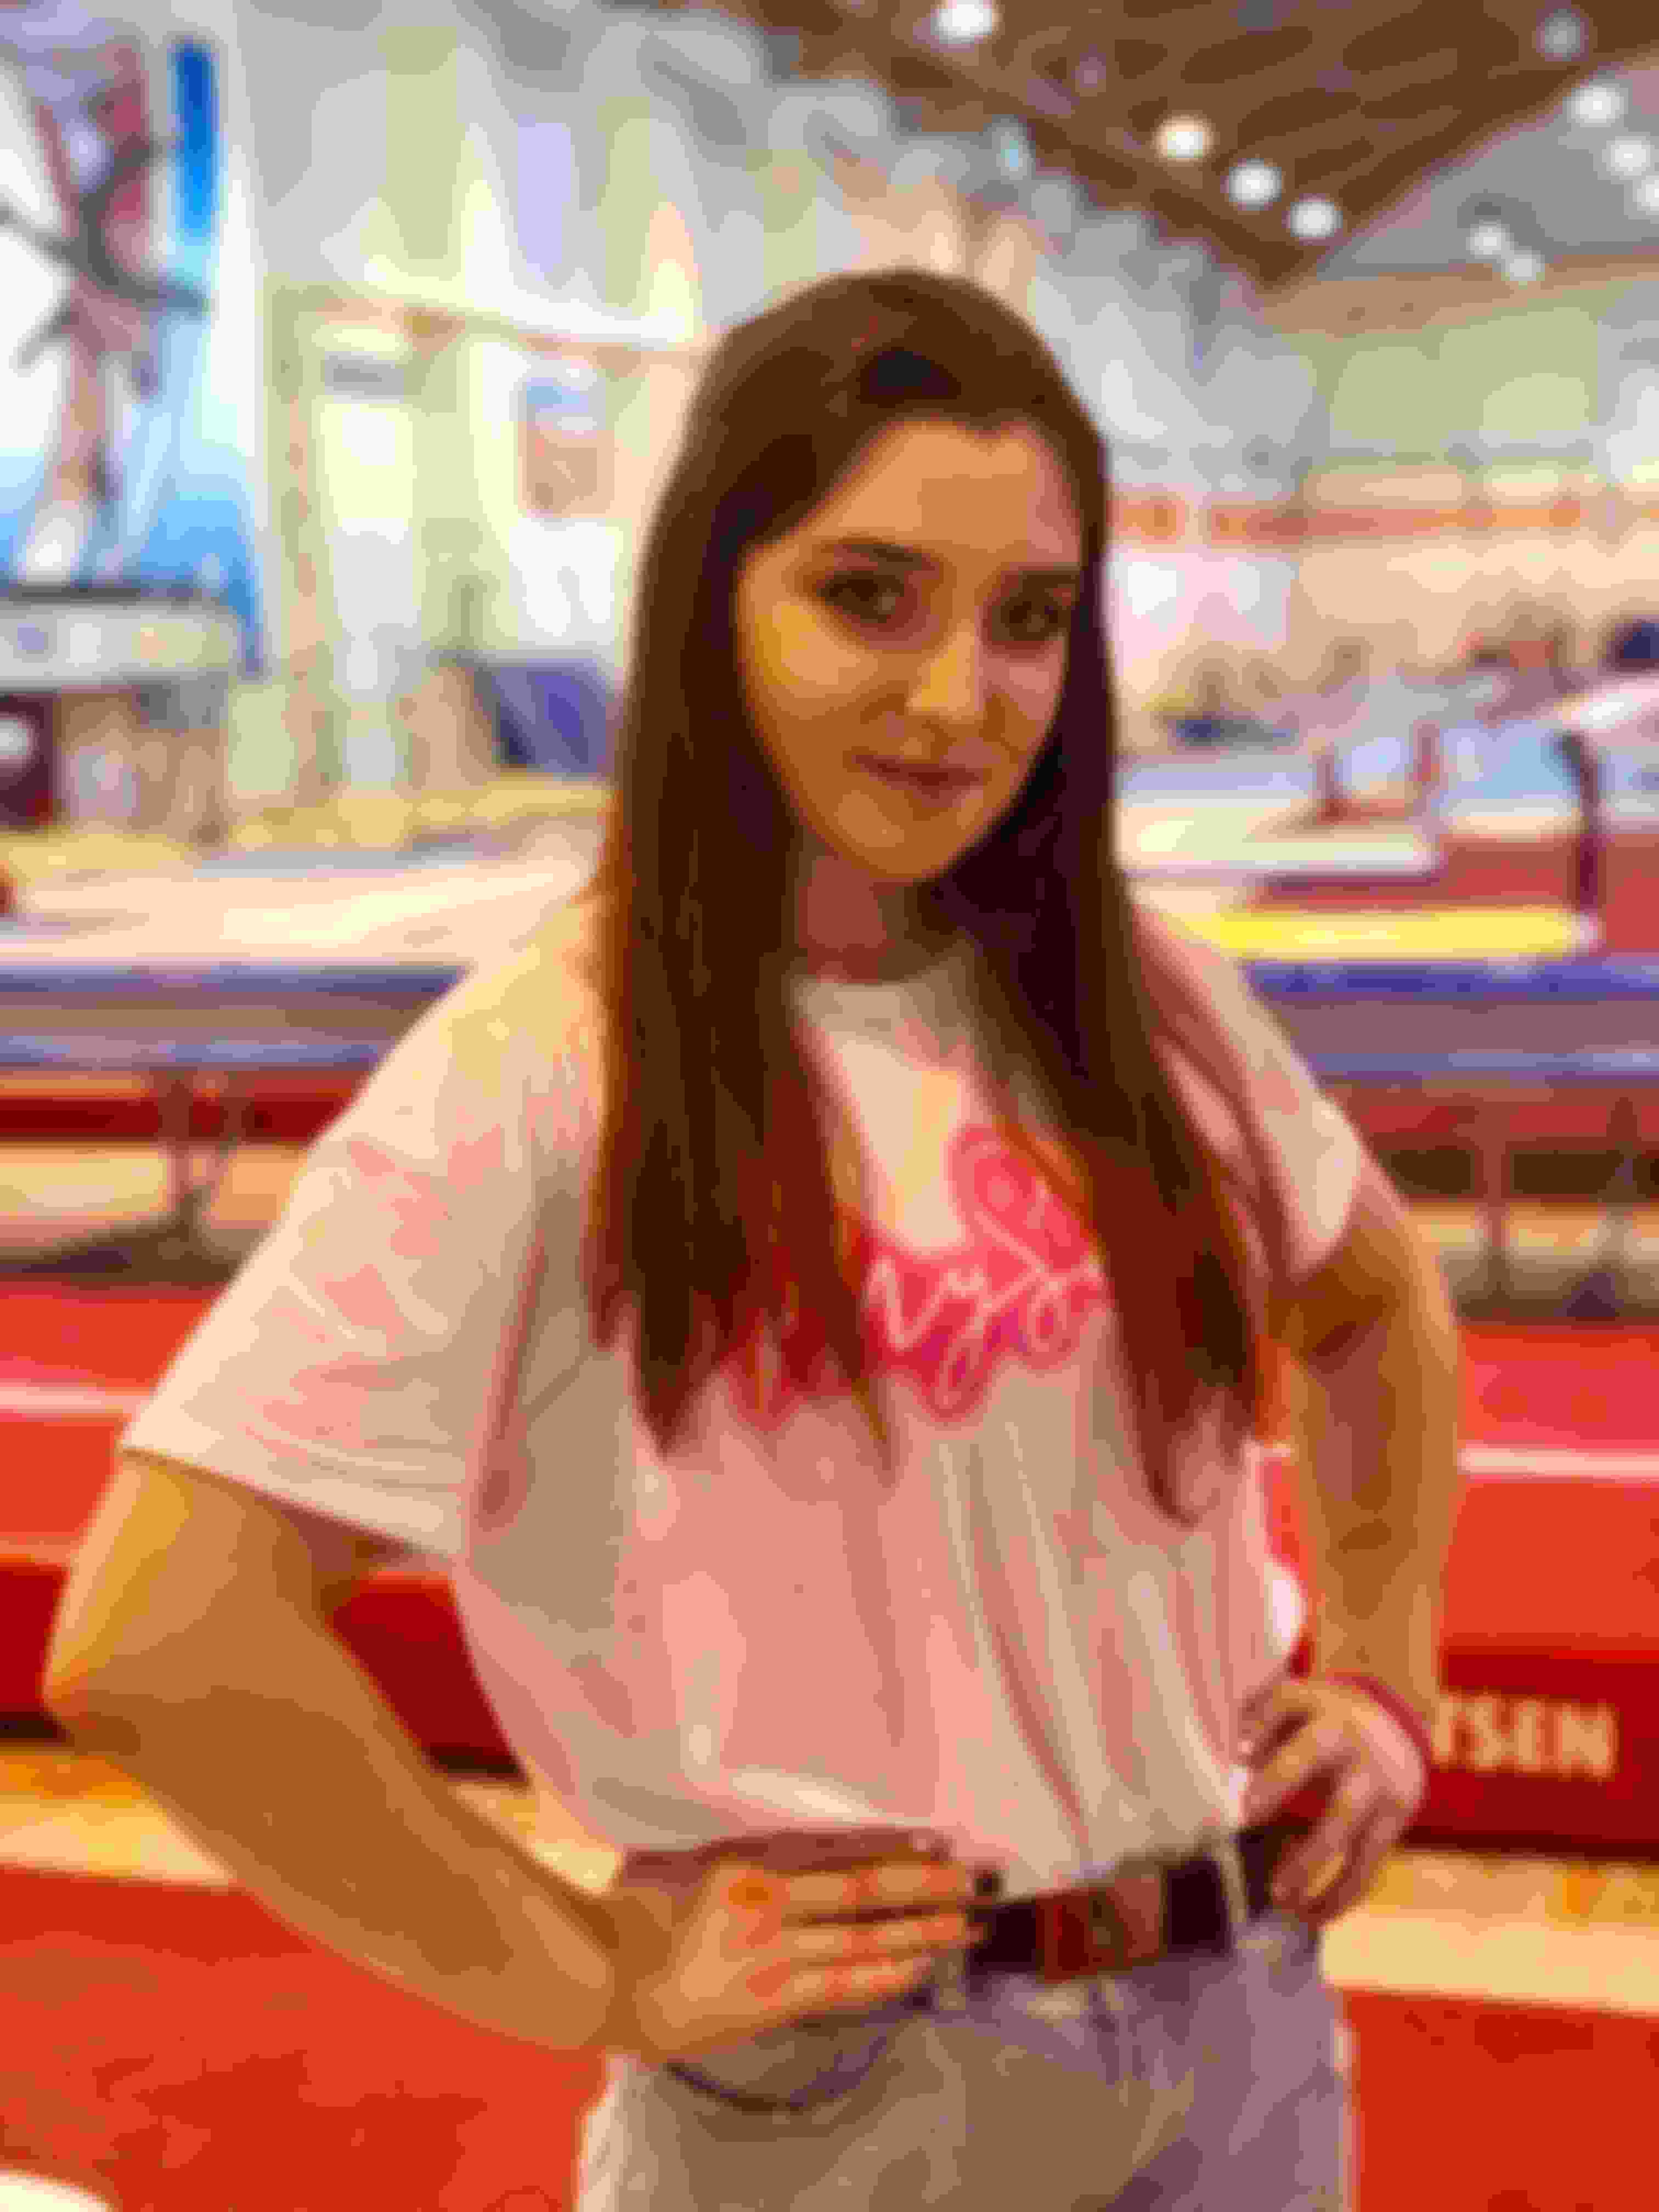 Double Olympic champion Aliya Mustafina at the 2019 Russian Cup in Penza